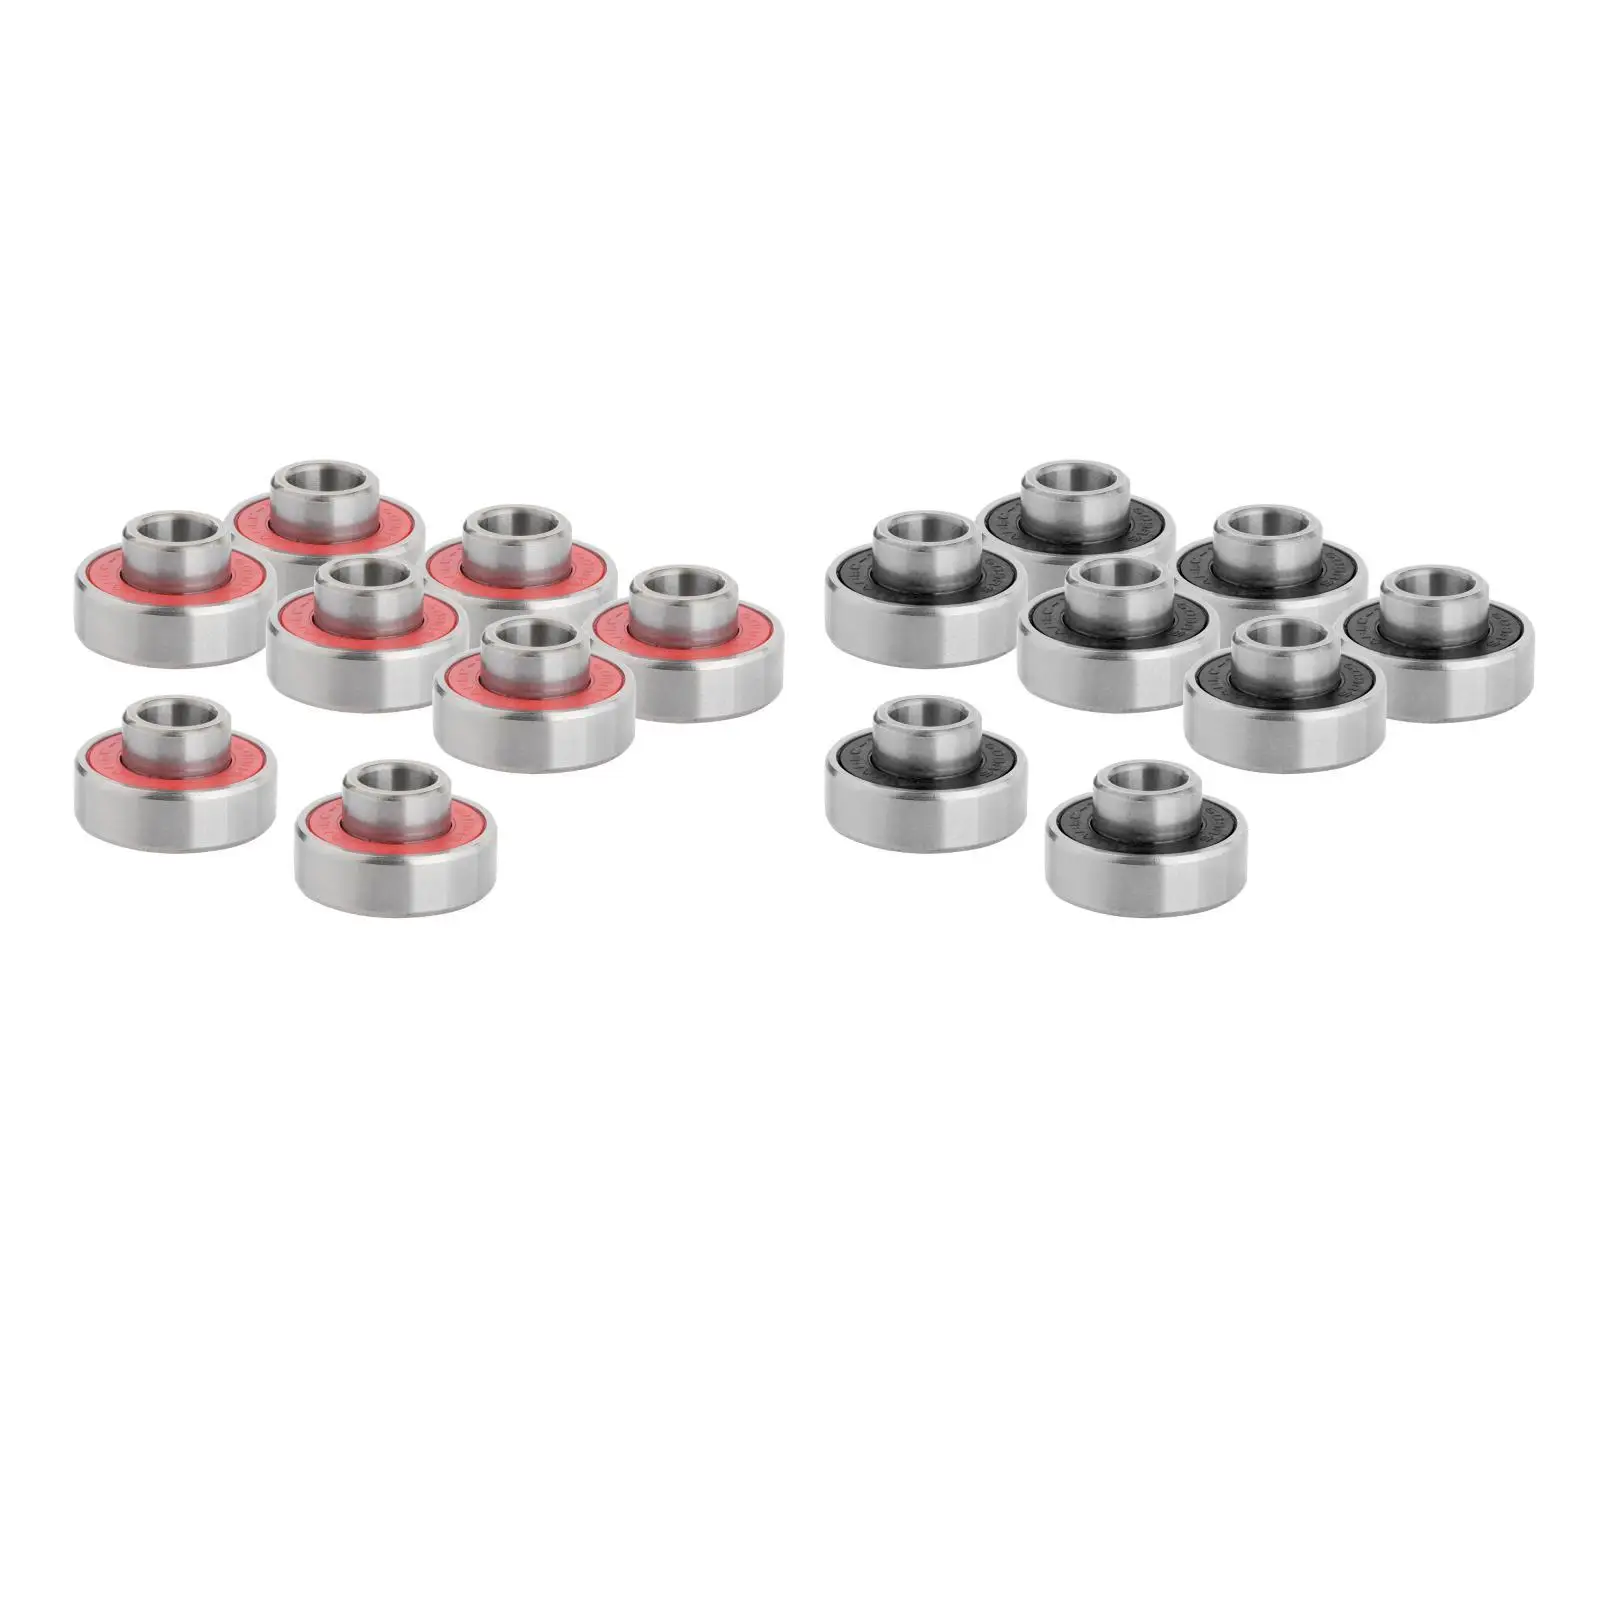 8x Skateboard Bearings ABEC 11 Precision 608 2RS with  and  Washers for Longboard, Scooter, Roller Skates, Inline Wheels